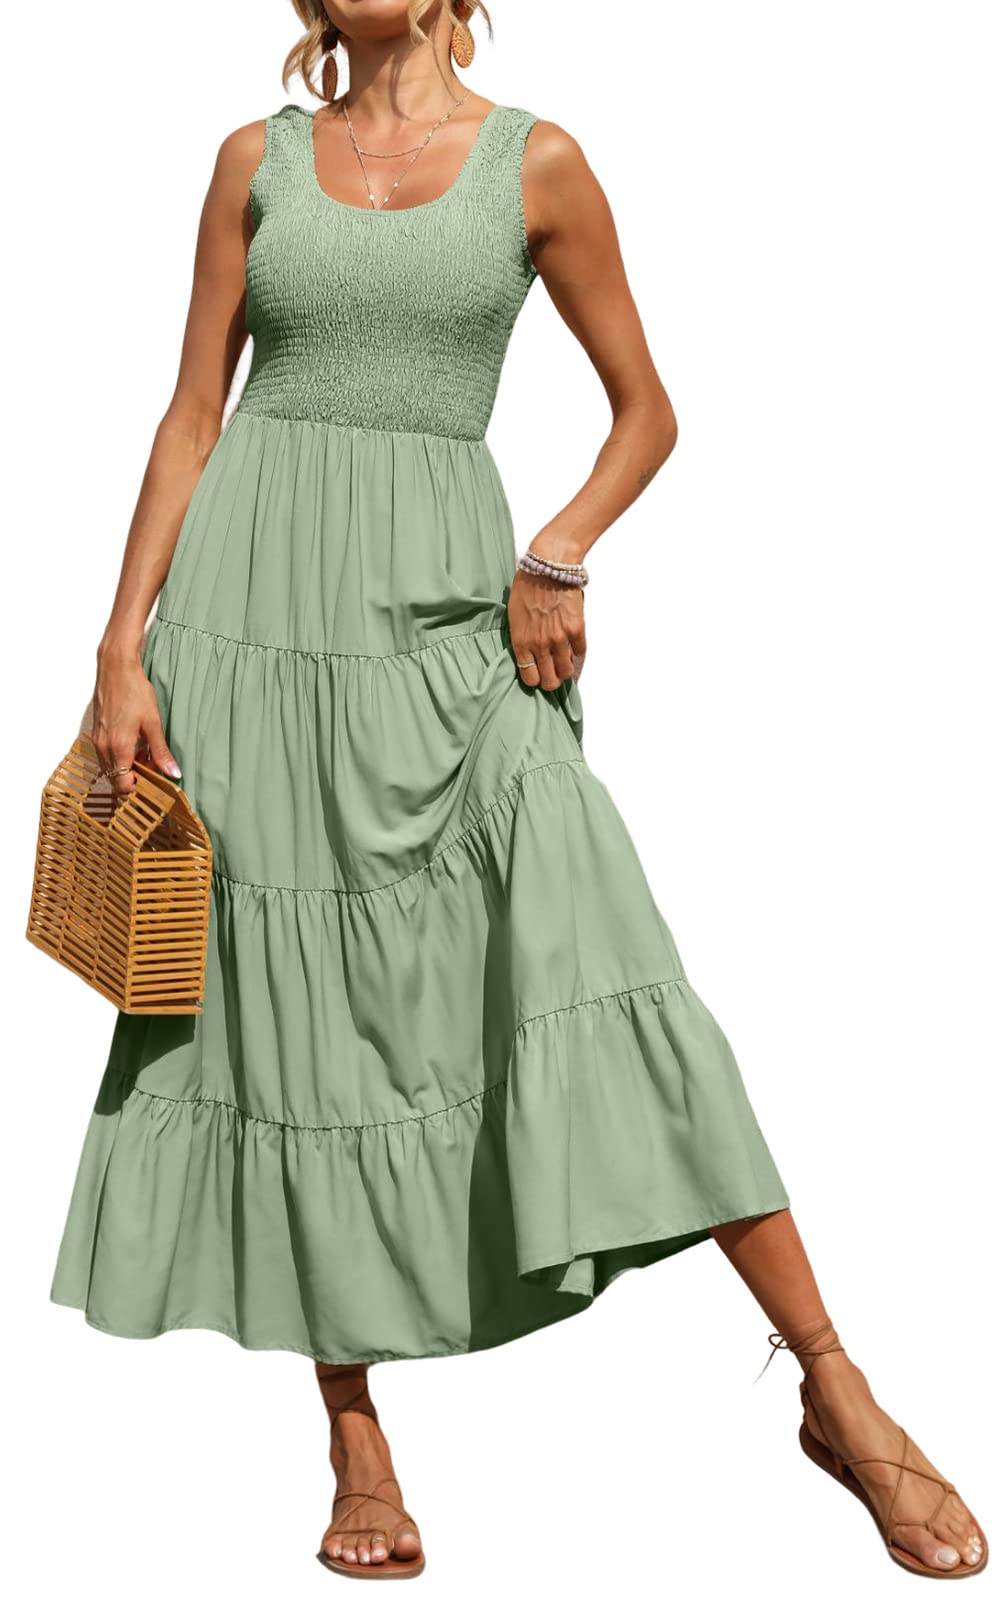 ✨Mother's Day Sale✨Summer Maxi Dress Casual Boho🔥